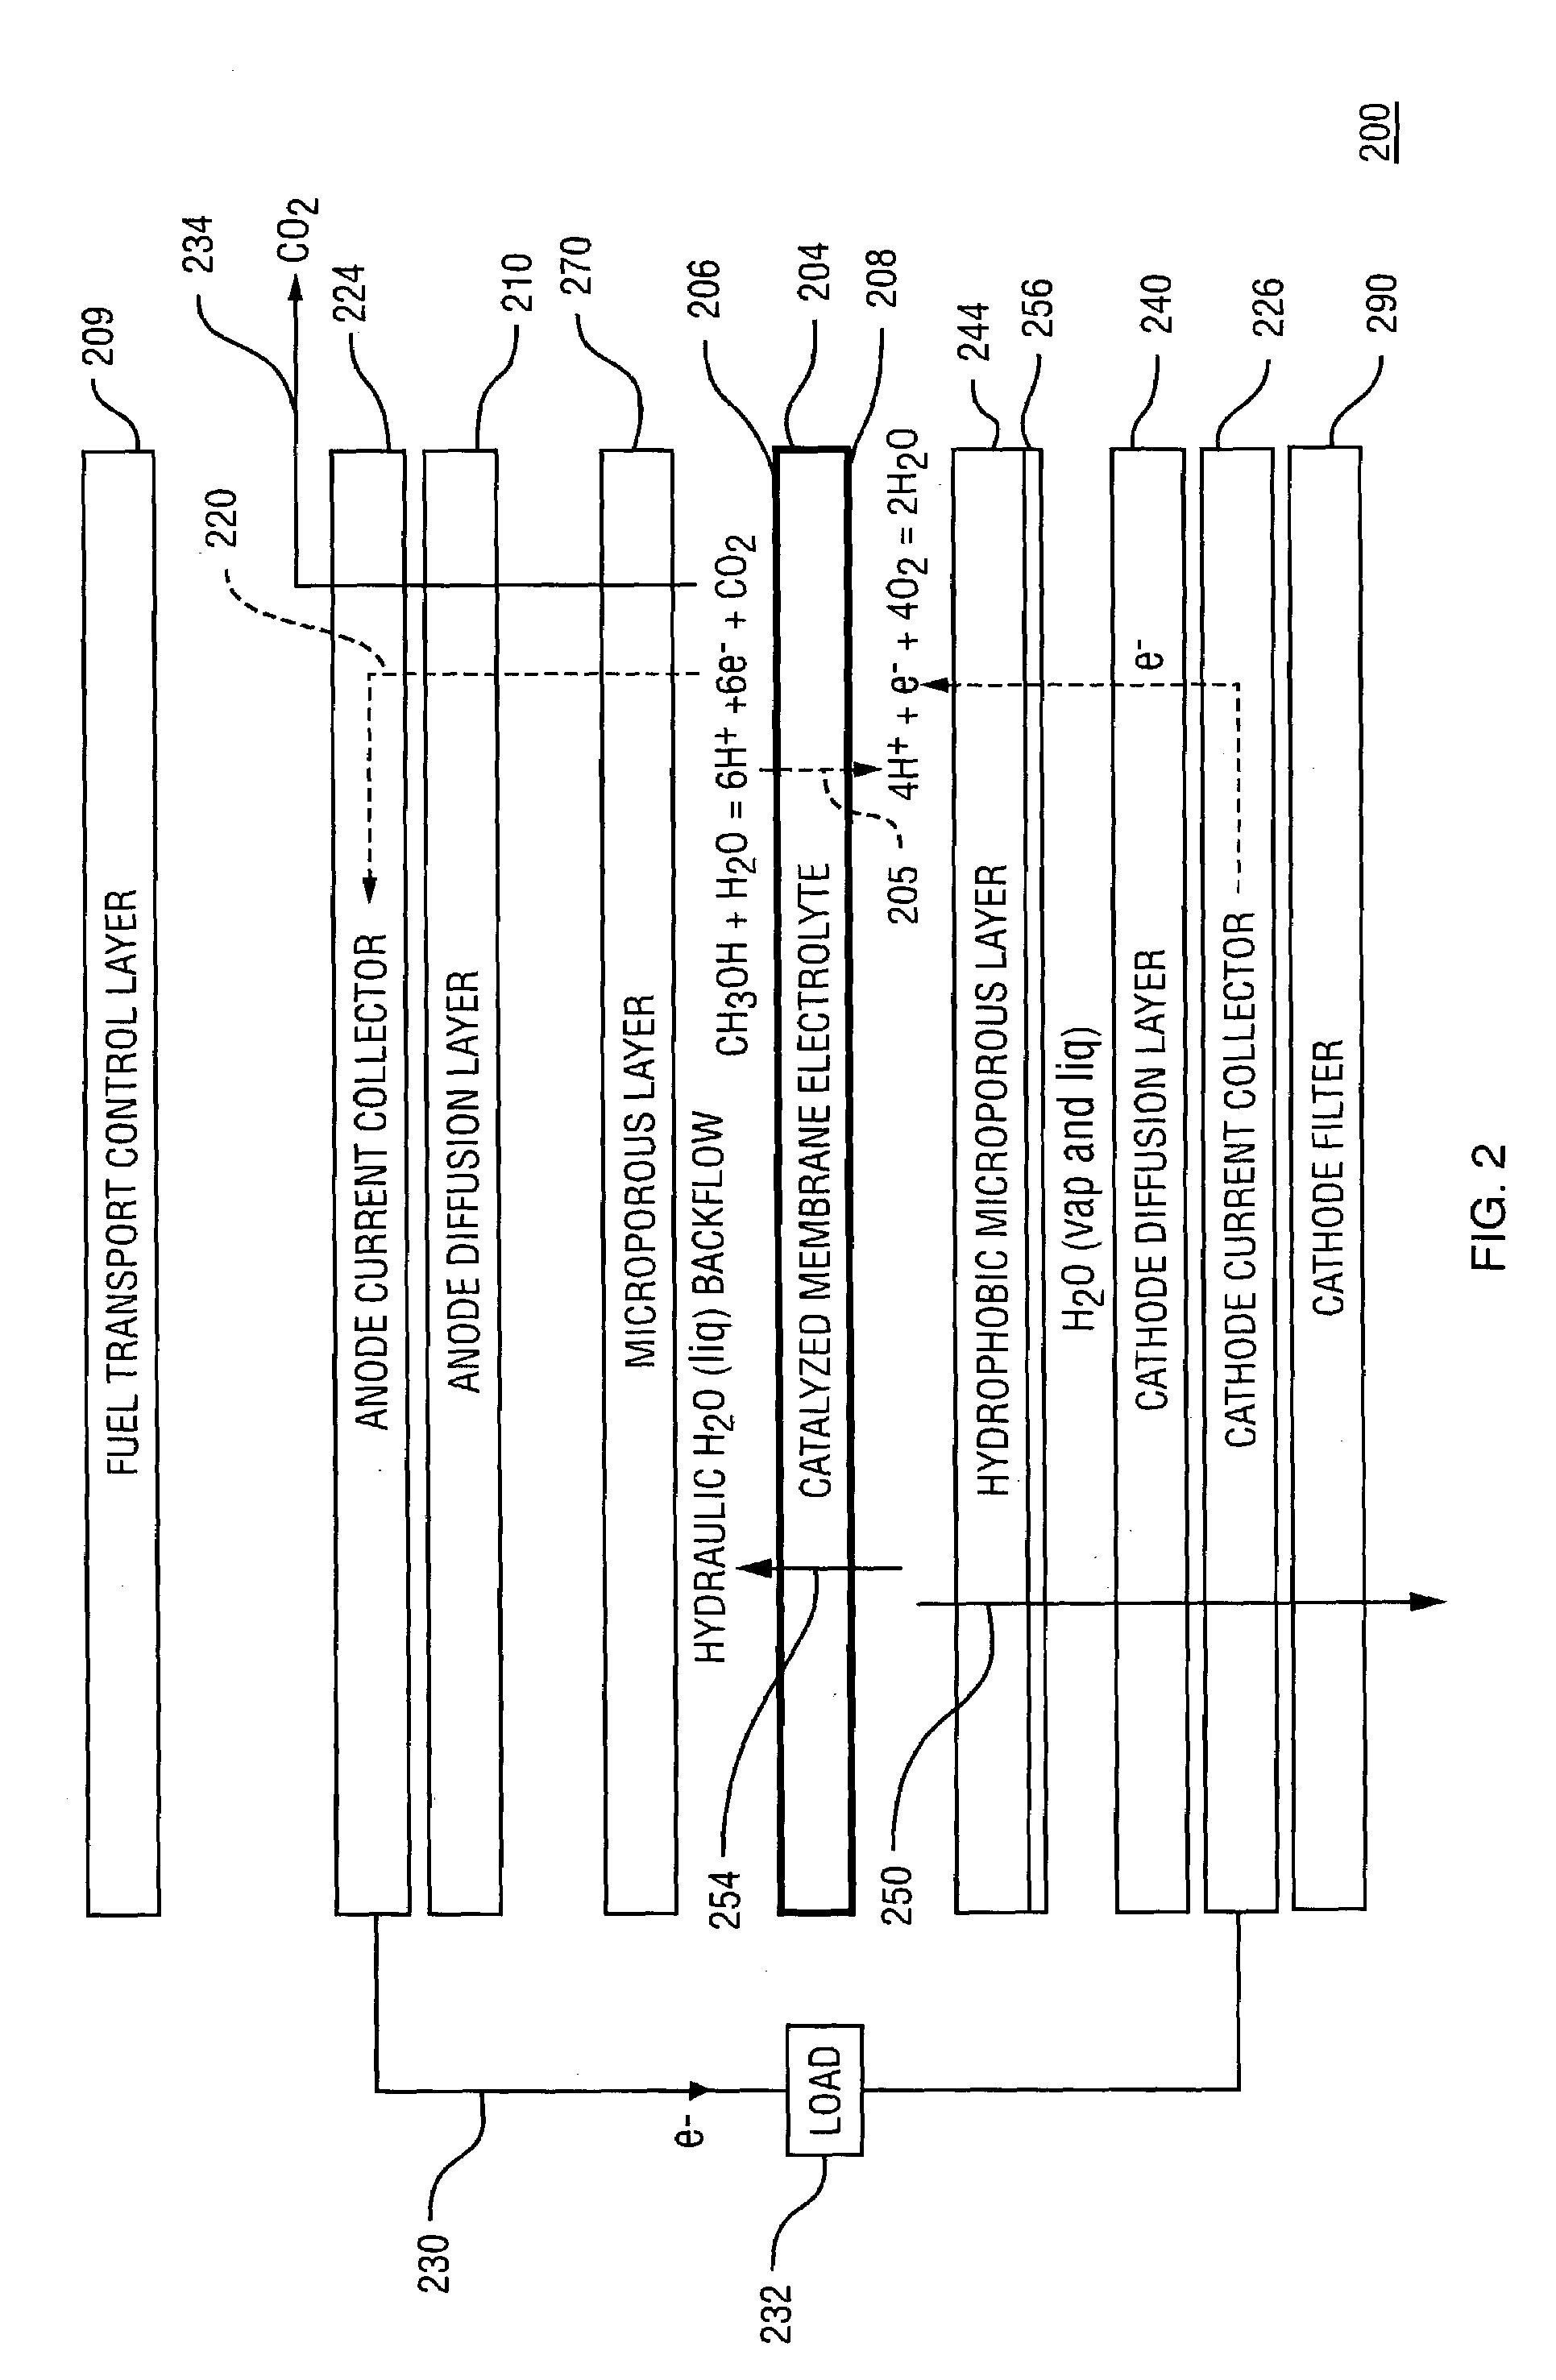 Direct oxidation fuel cell operating with direct feed of concentrated fuel under passive water management